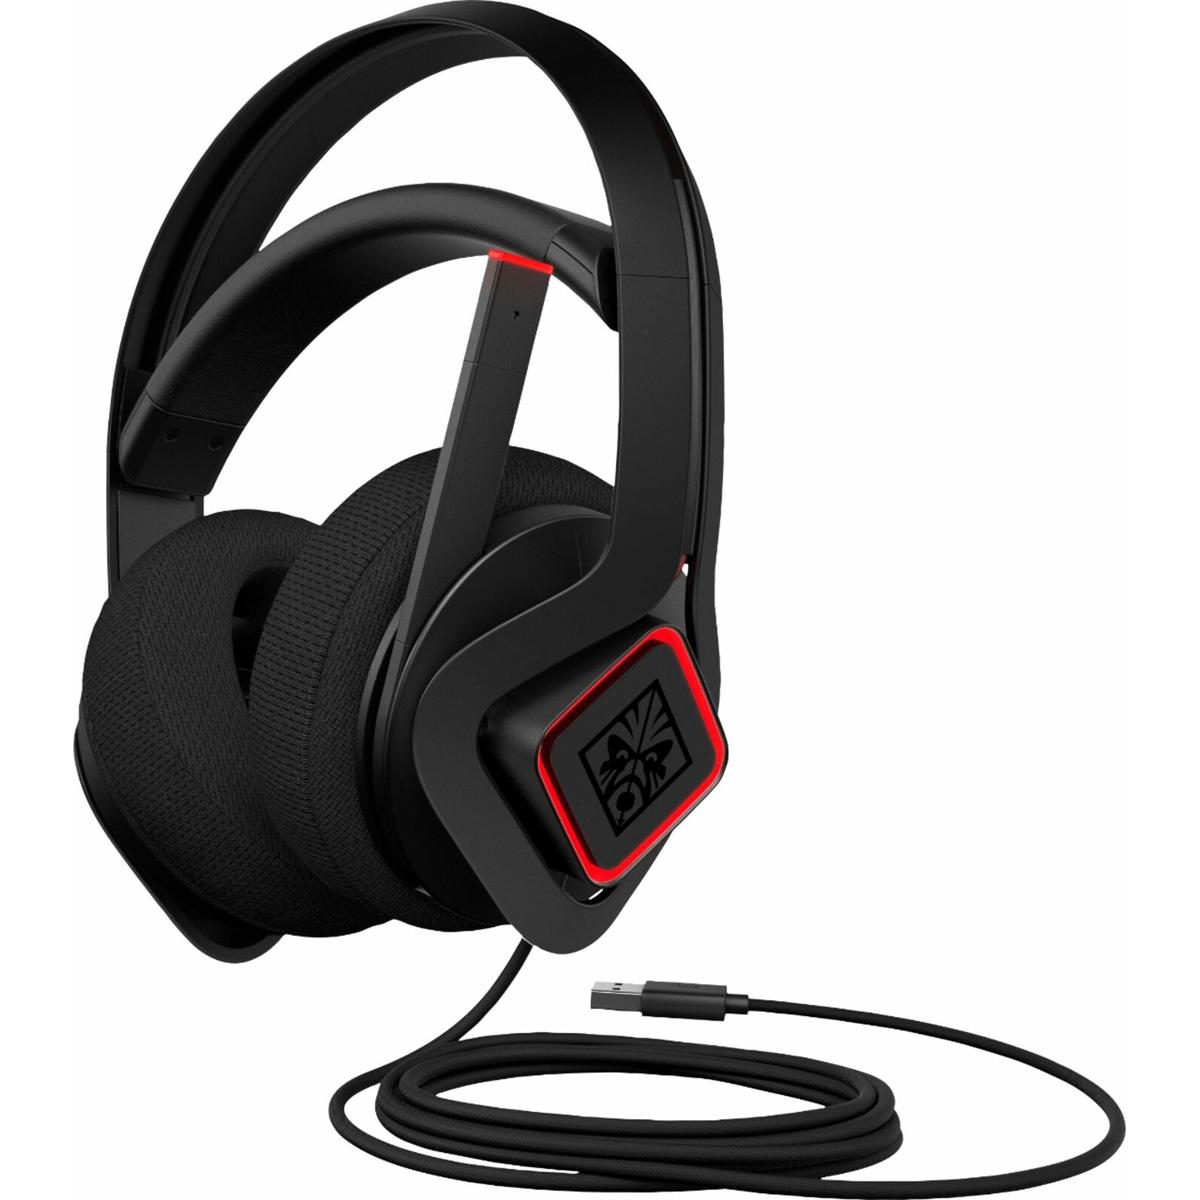 HP Omen Mindframe Wired 7.1 Gaming Headset for $49.99 Shipped